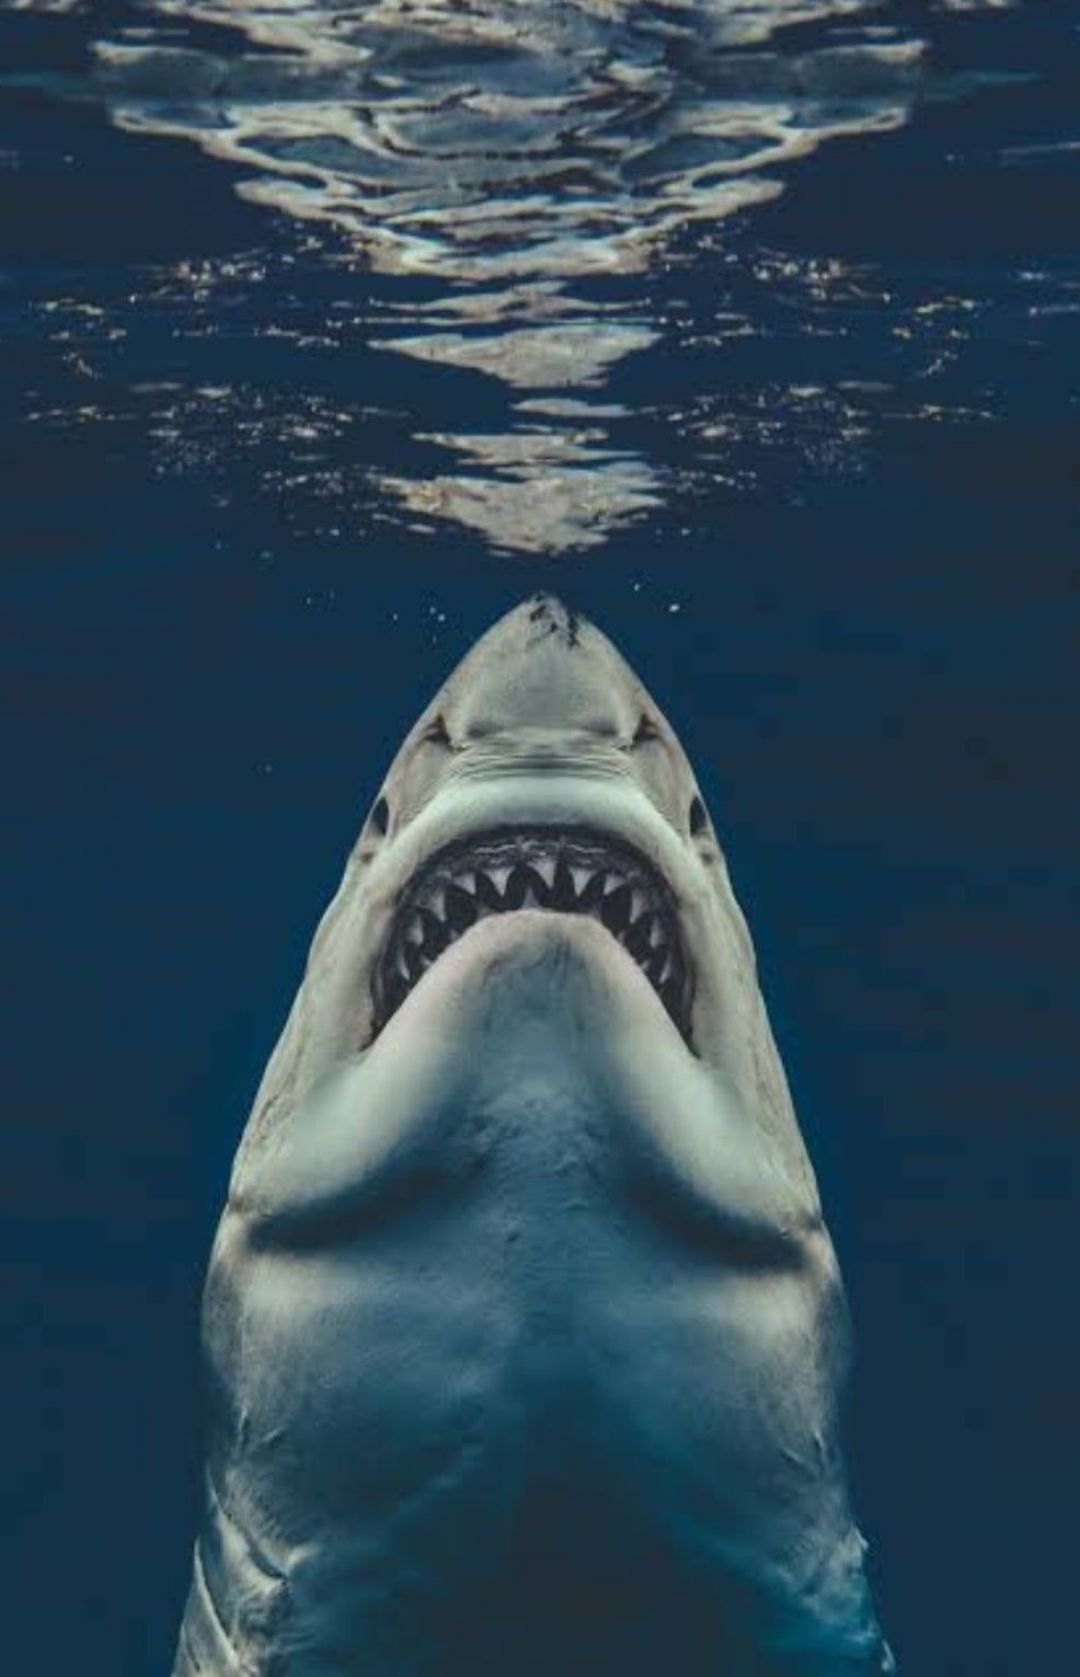 Great White Shark Image, HD Photo (1080p), Wallpaper (Android IPhone) (2021)